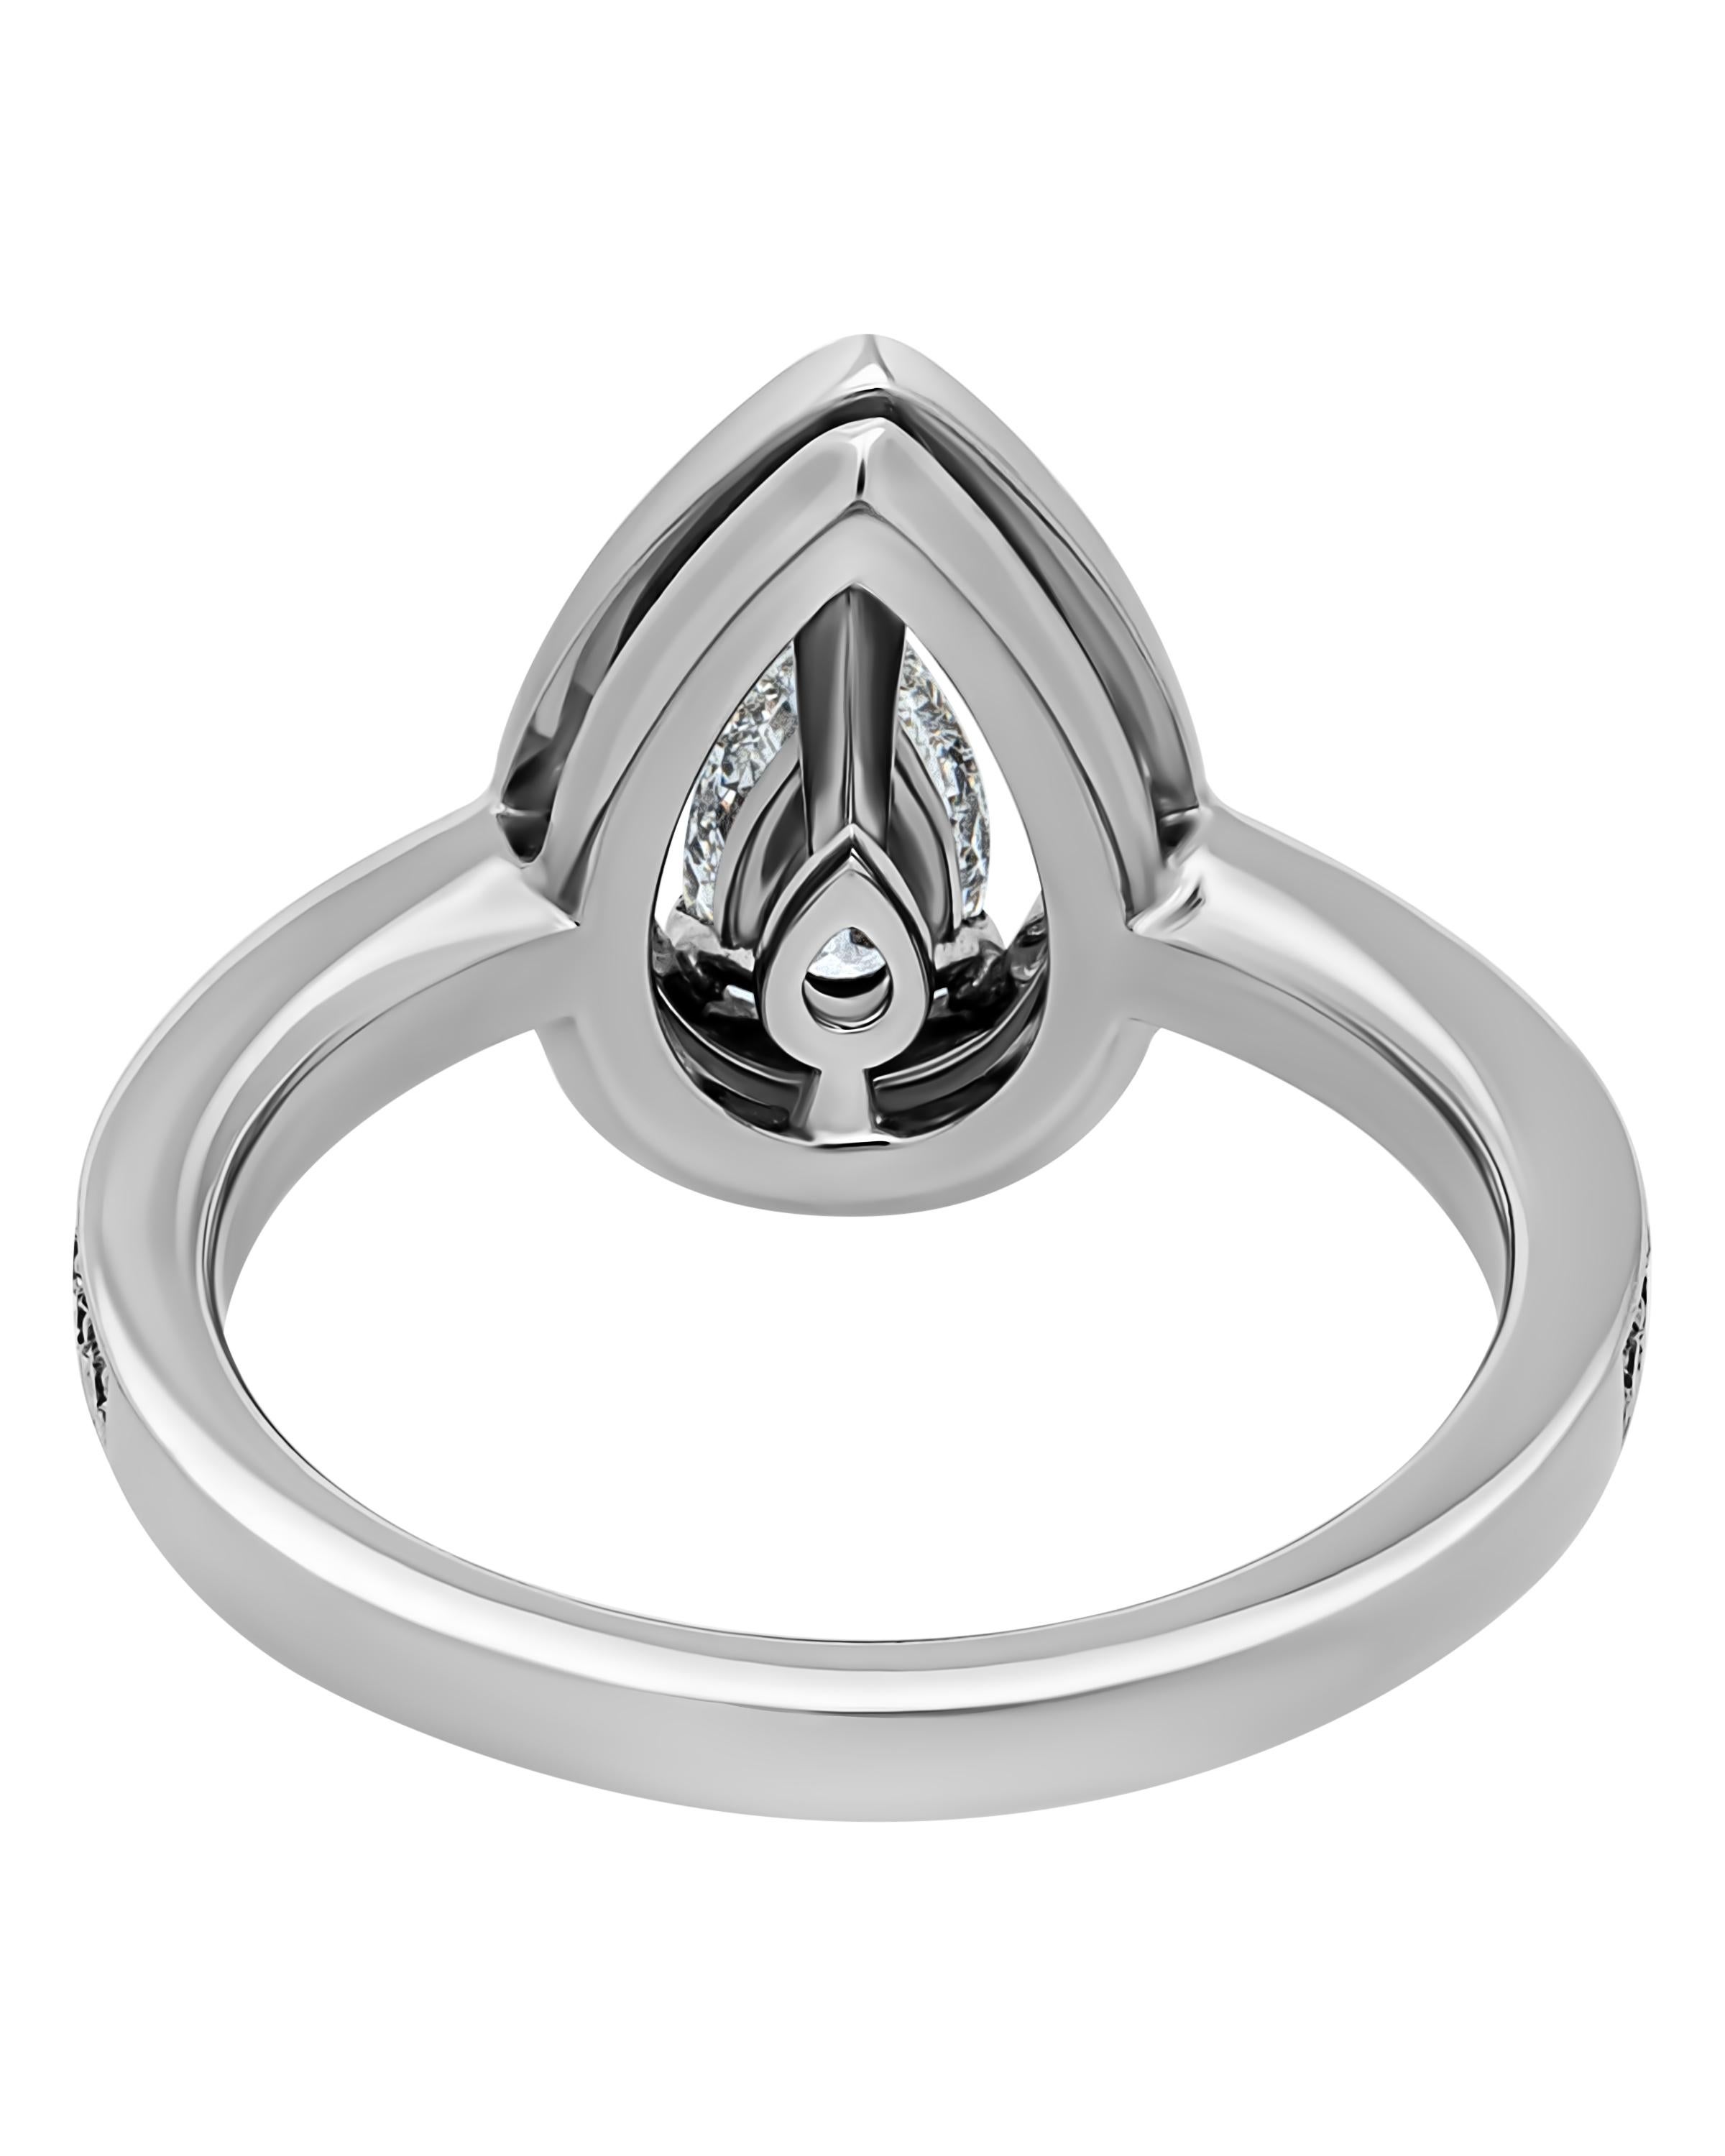 Contemporary FRED Lovelight Platinum Diamond Engagement Ring sz 5.25 For Sale